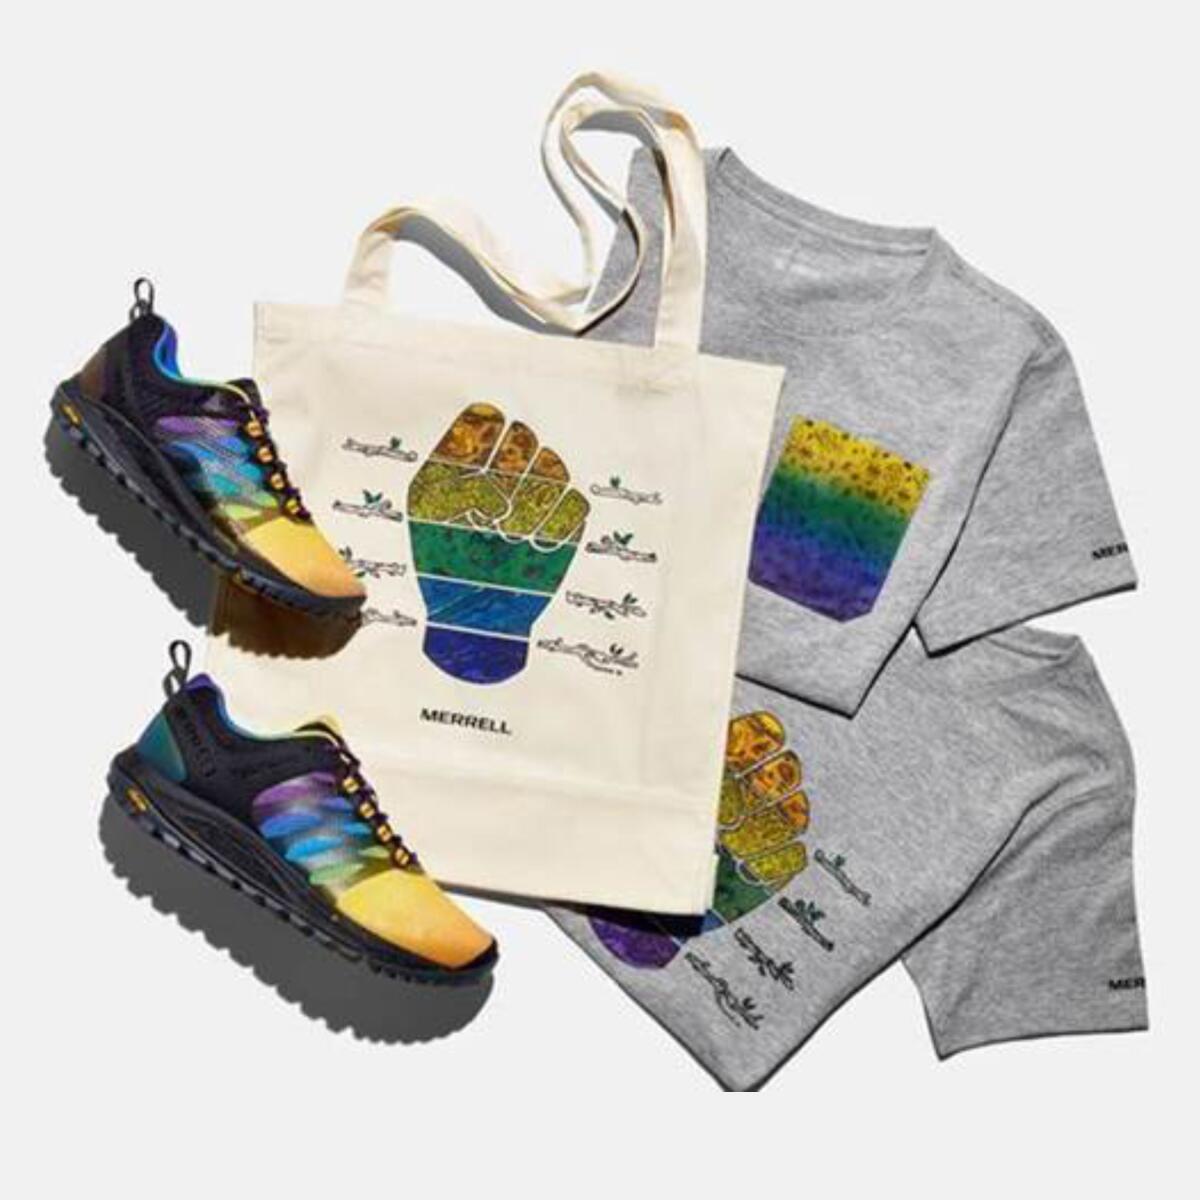 Merrell collaborative designs by artist Latasha Dunston are out this week.